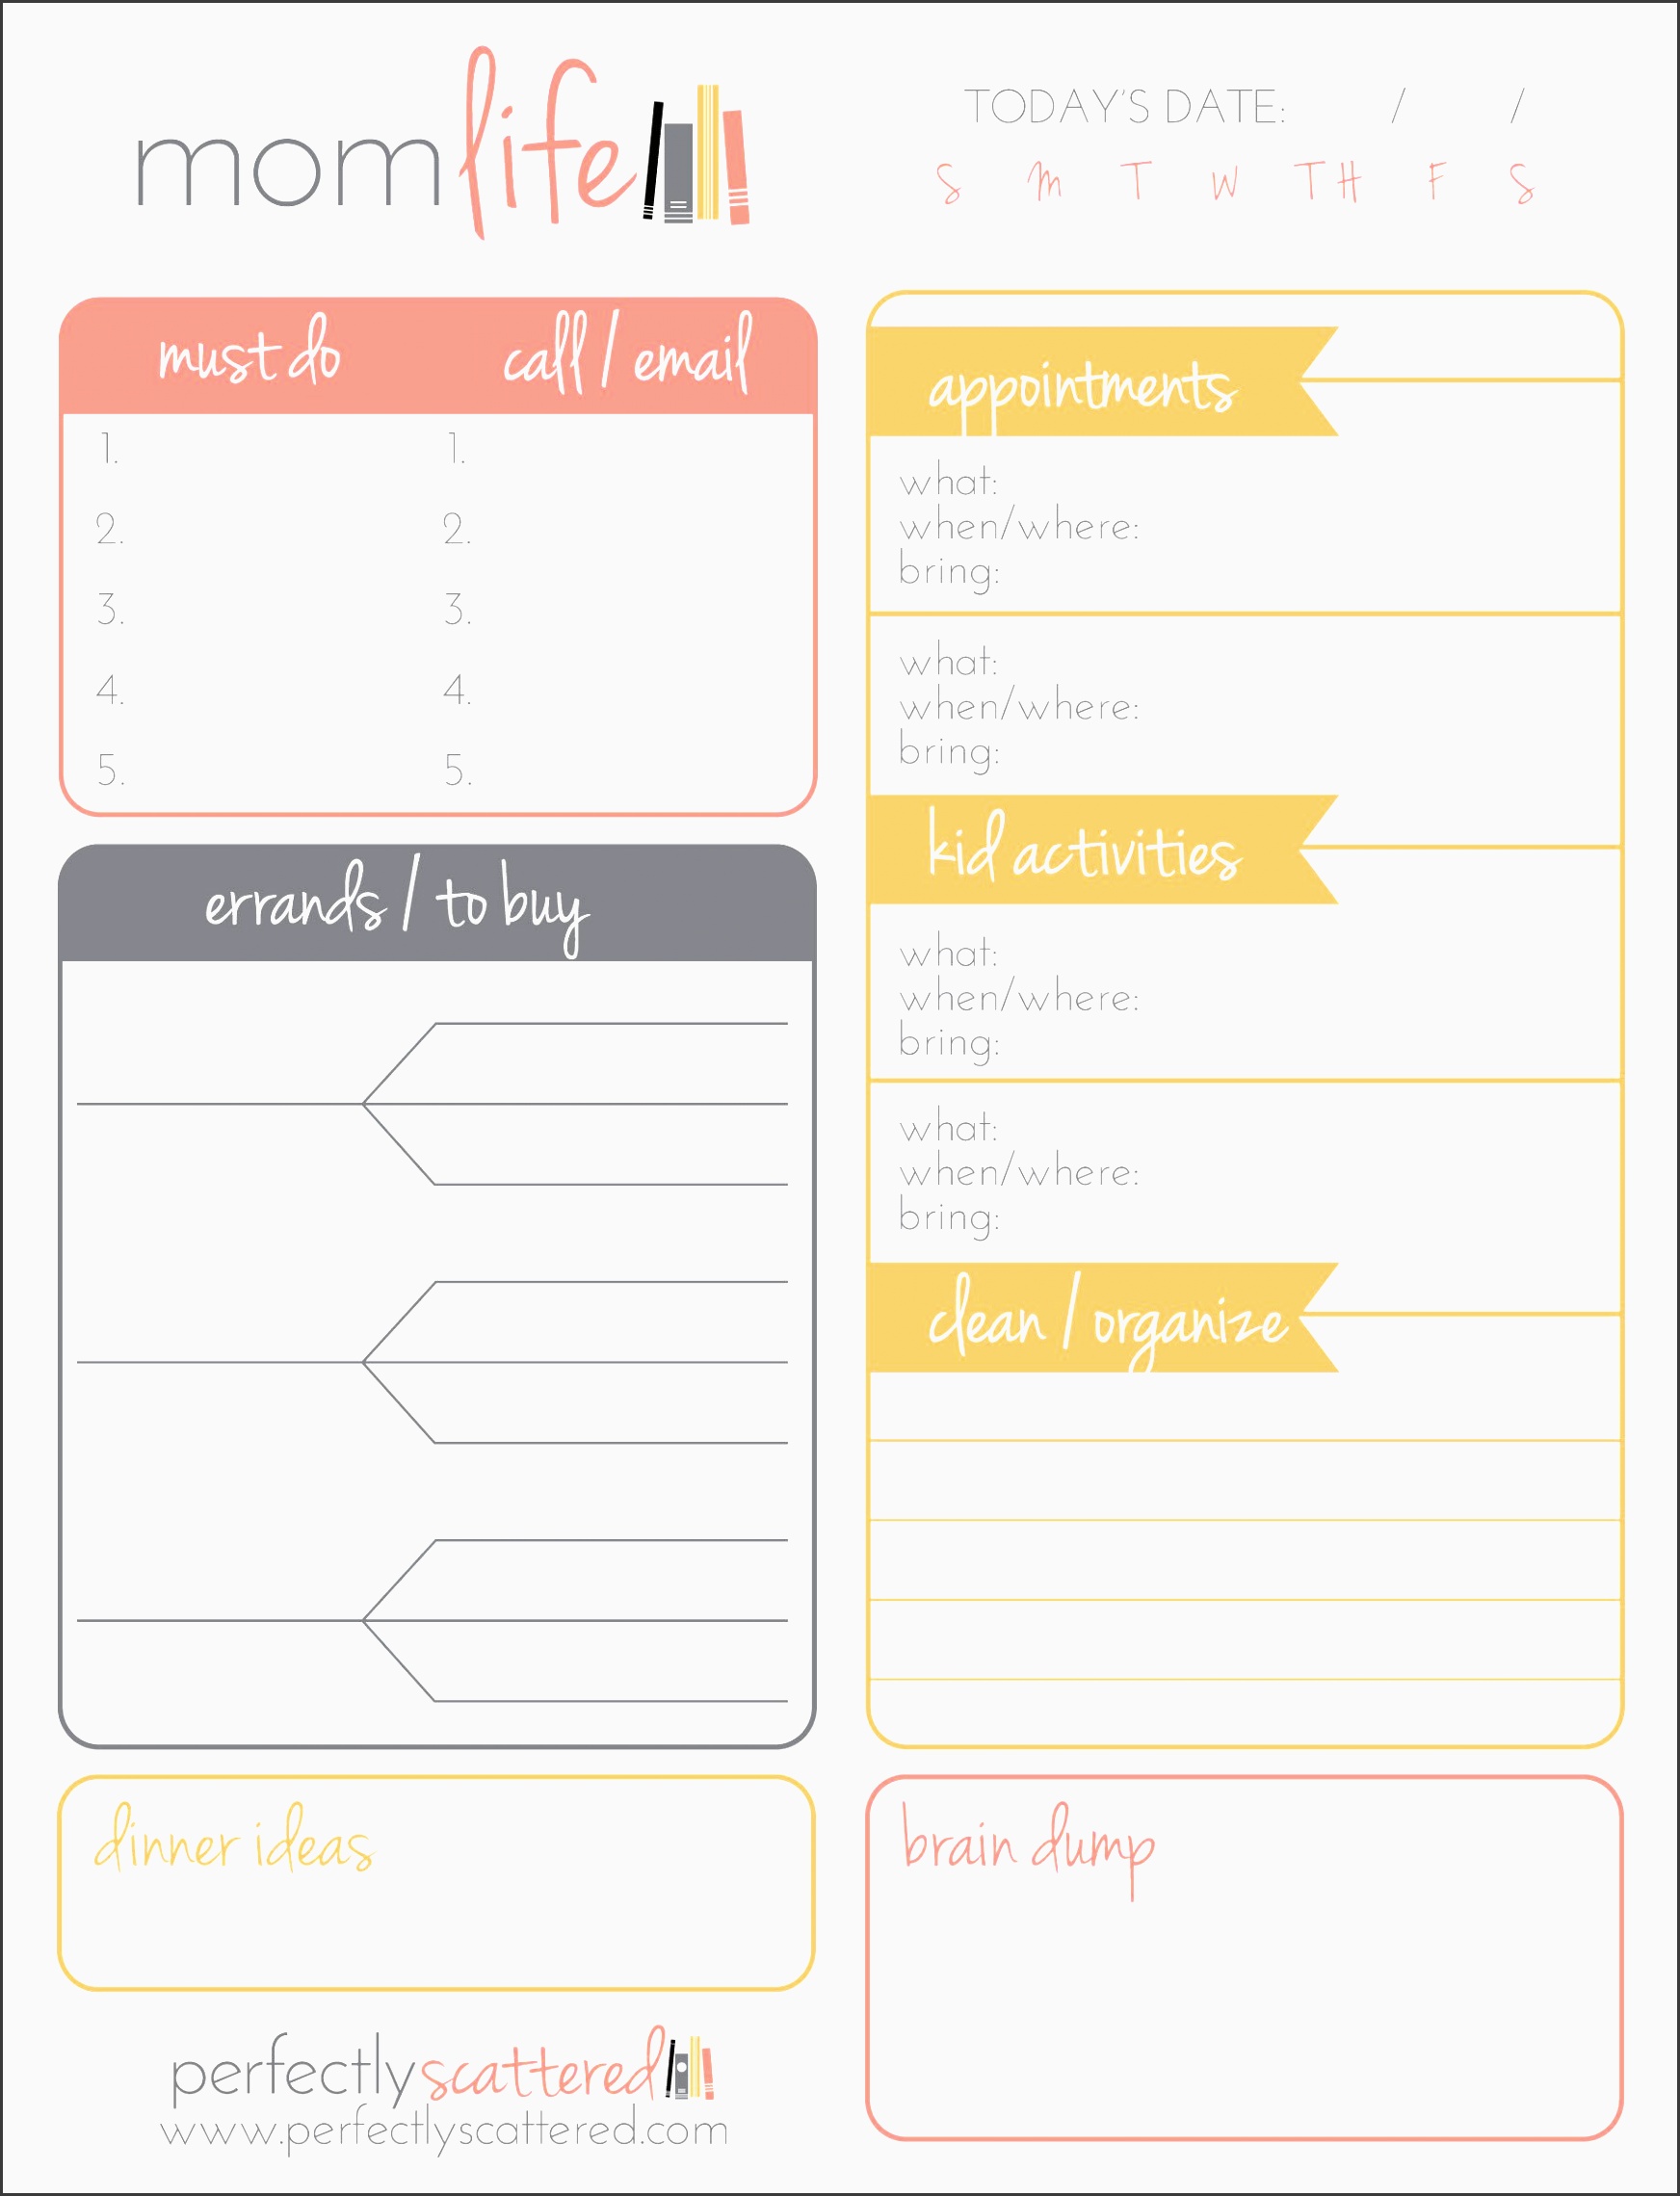 free printable daily planner for moms